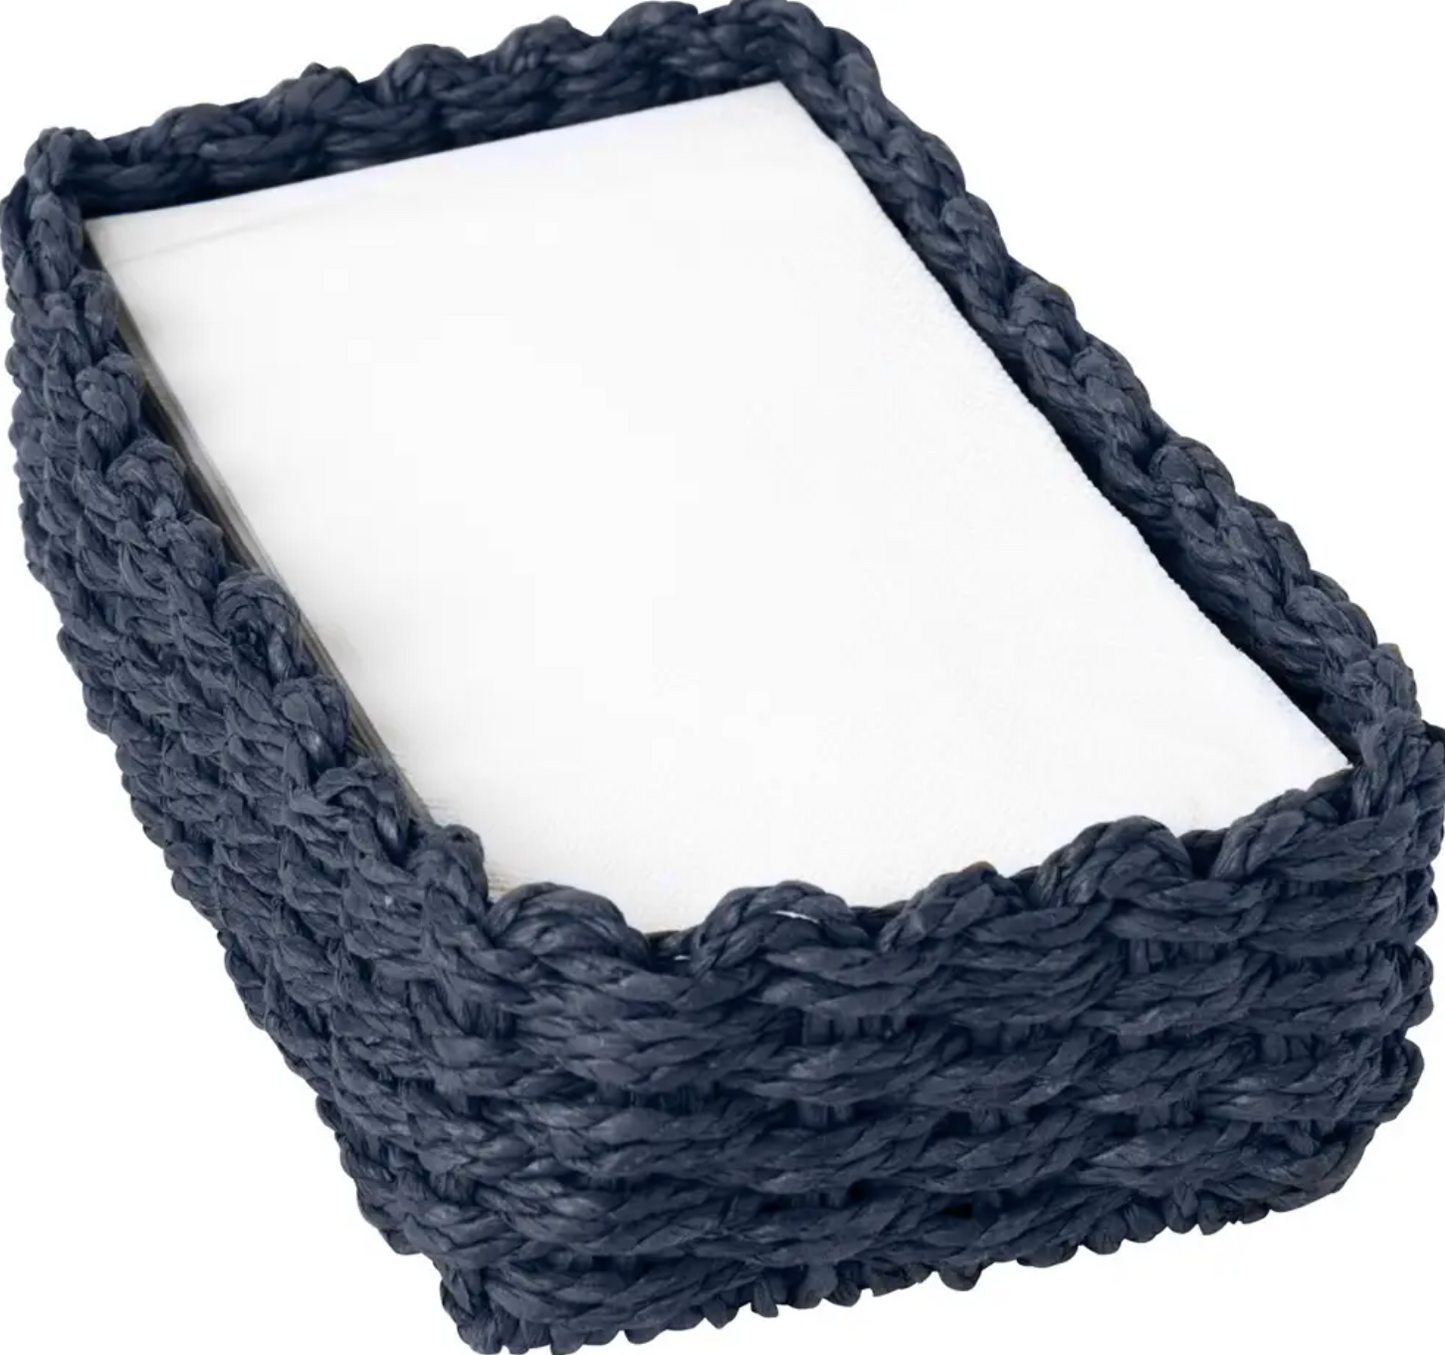 WOVEN PAPER GUEST TOWEL CADDY